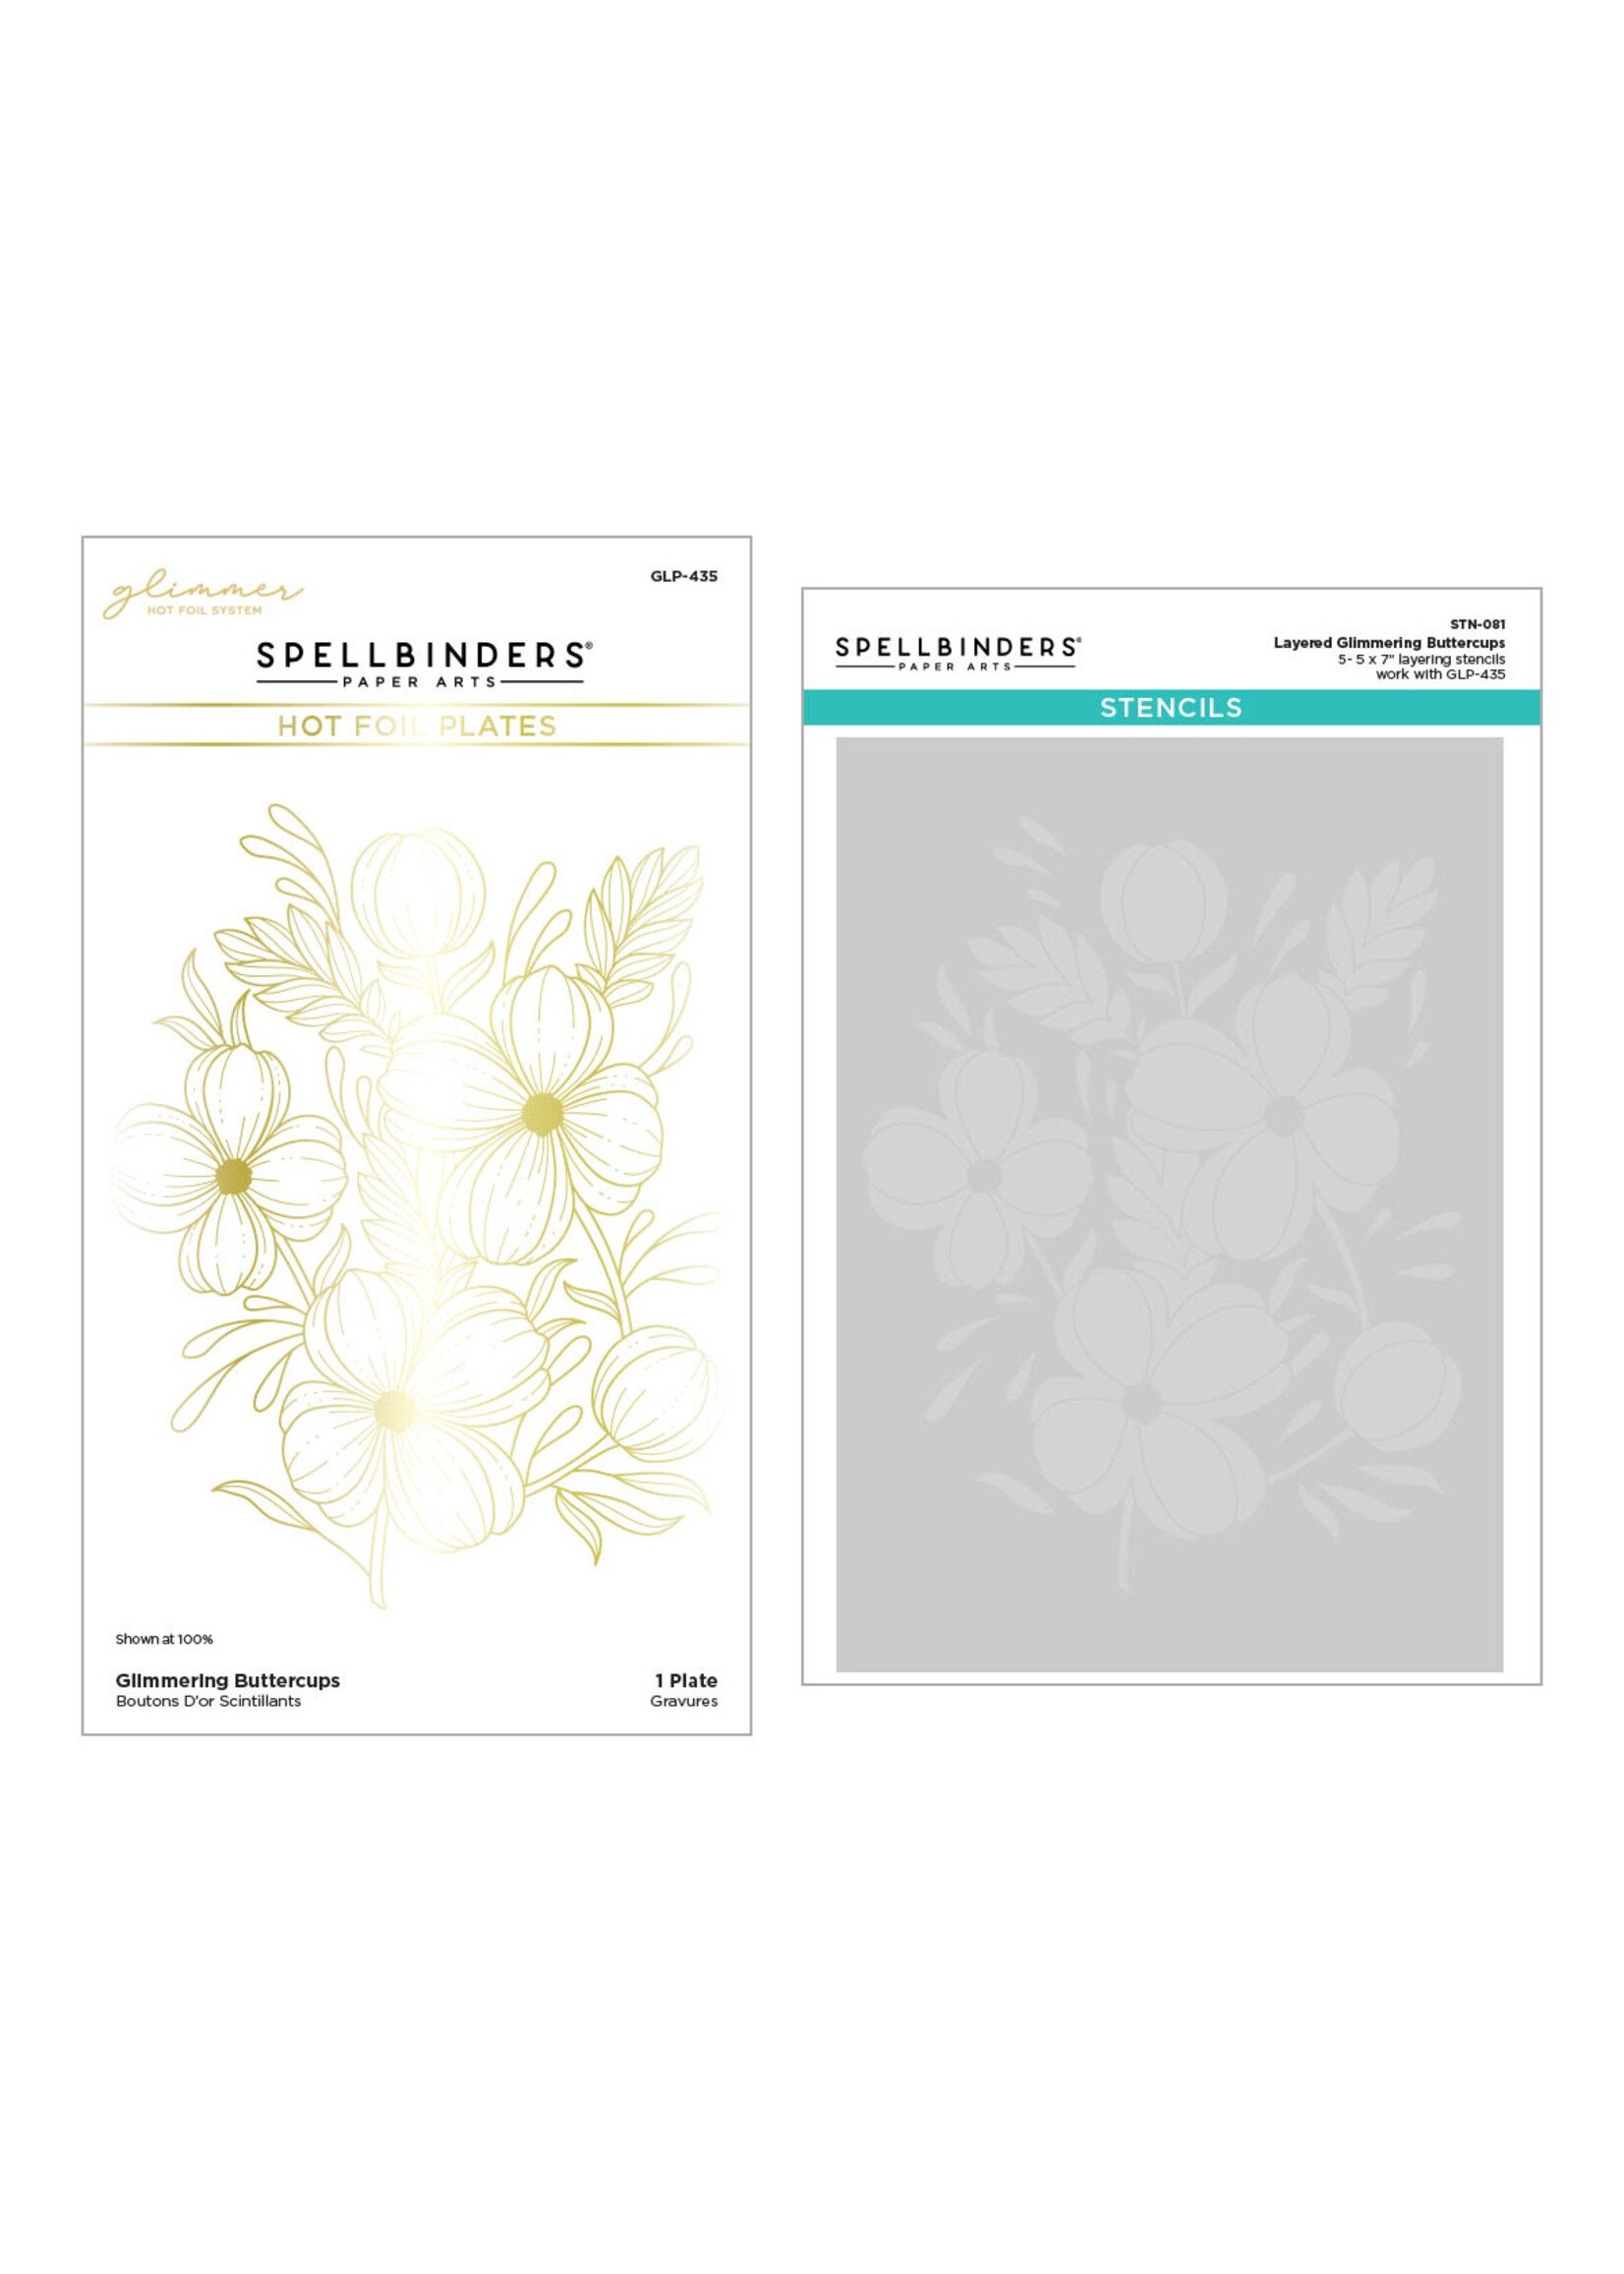 spellbinders Glimmering Buttercups Glimmer Plate and Stencil Bundle from the Glimmering Flowers Collection